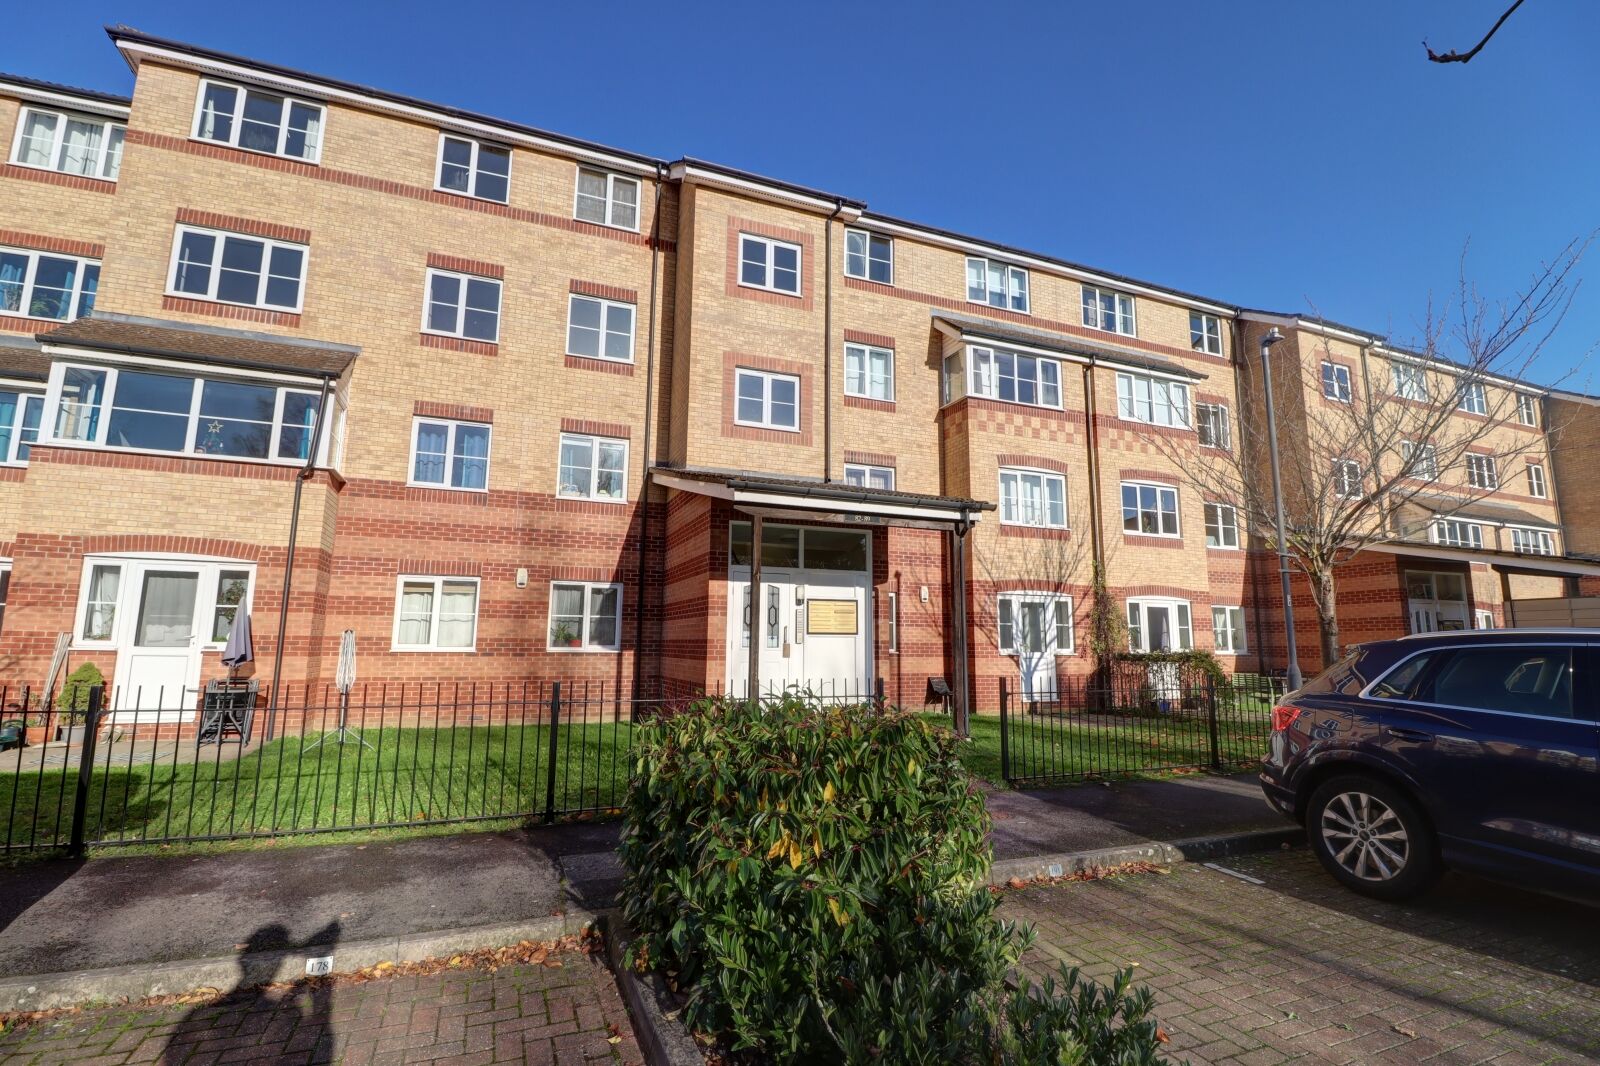 2 bedroom  flat to rent, Available now Peatey Court, Princes Gate, HP13, main image